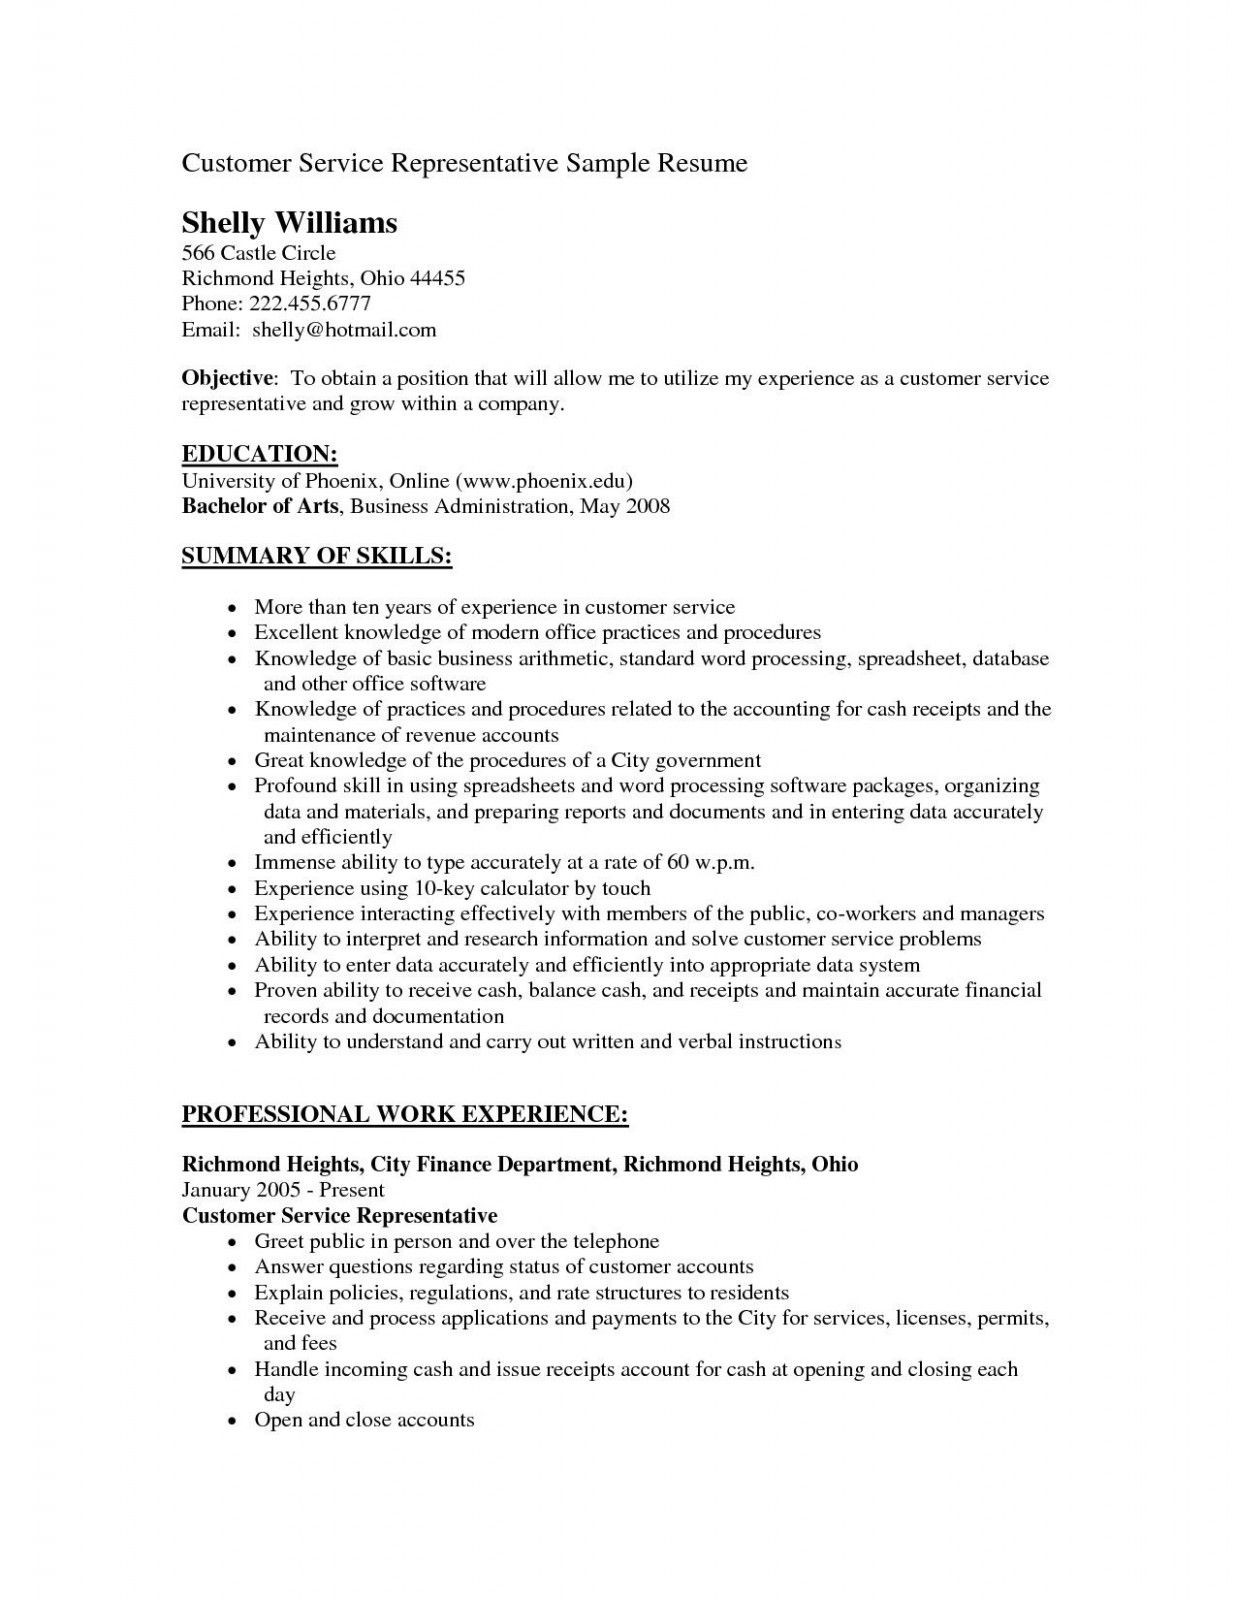 Sample Resume Objective Statements for Customer Service Public Works Resume Objective In 2021 Resume Objective Examples …